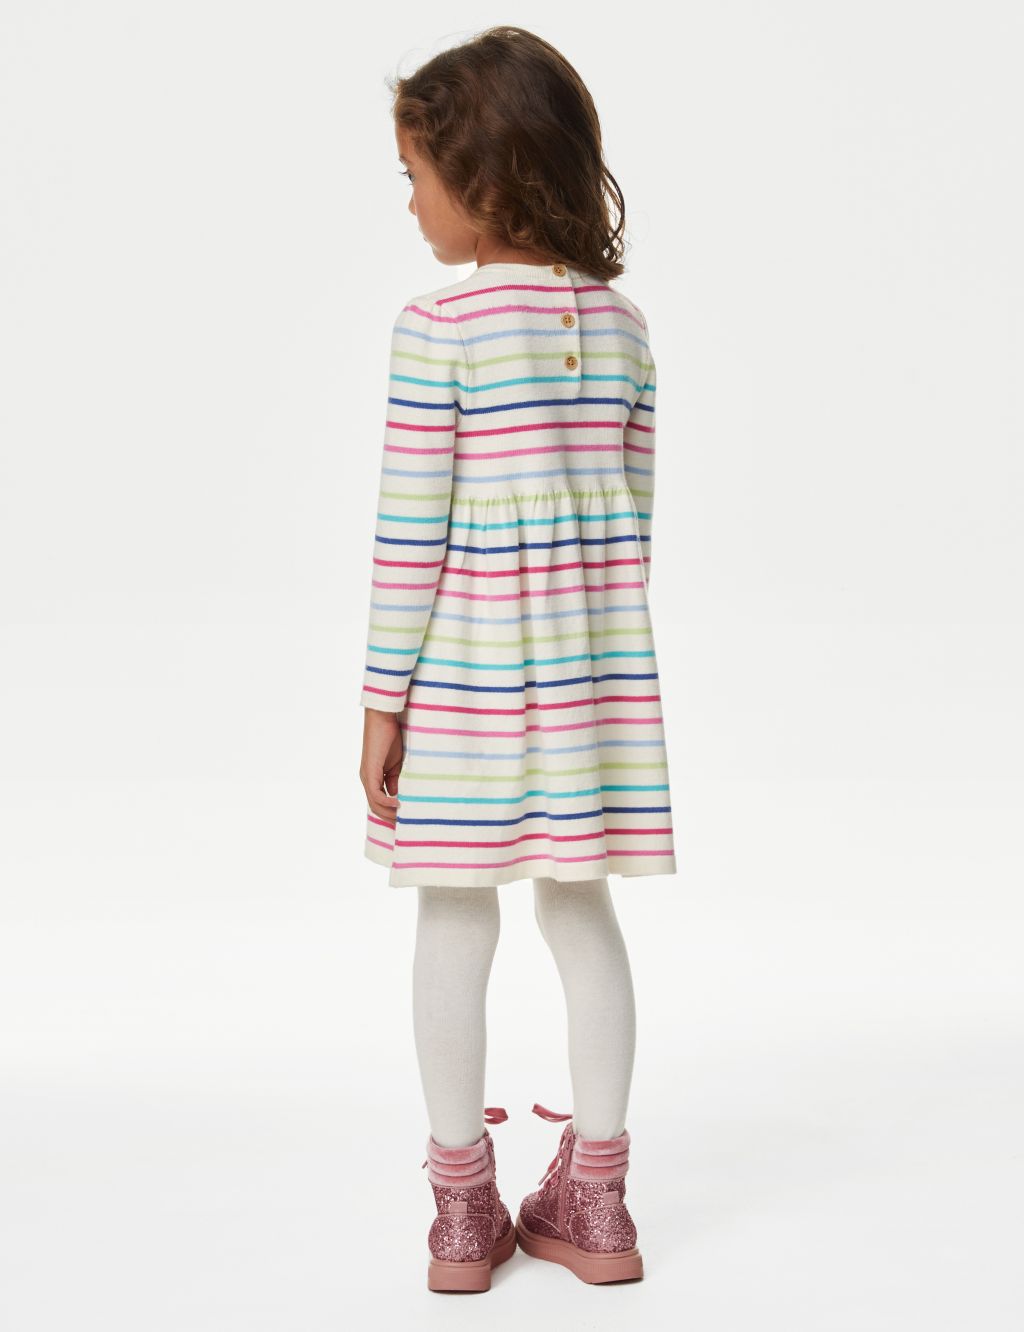 Rainbow Striped Dress with Tights (2-8 Yrs) image 4